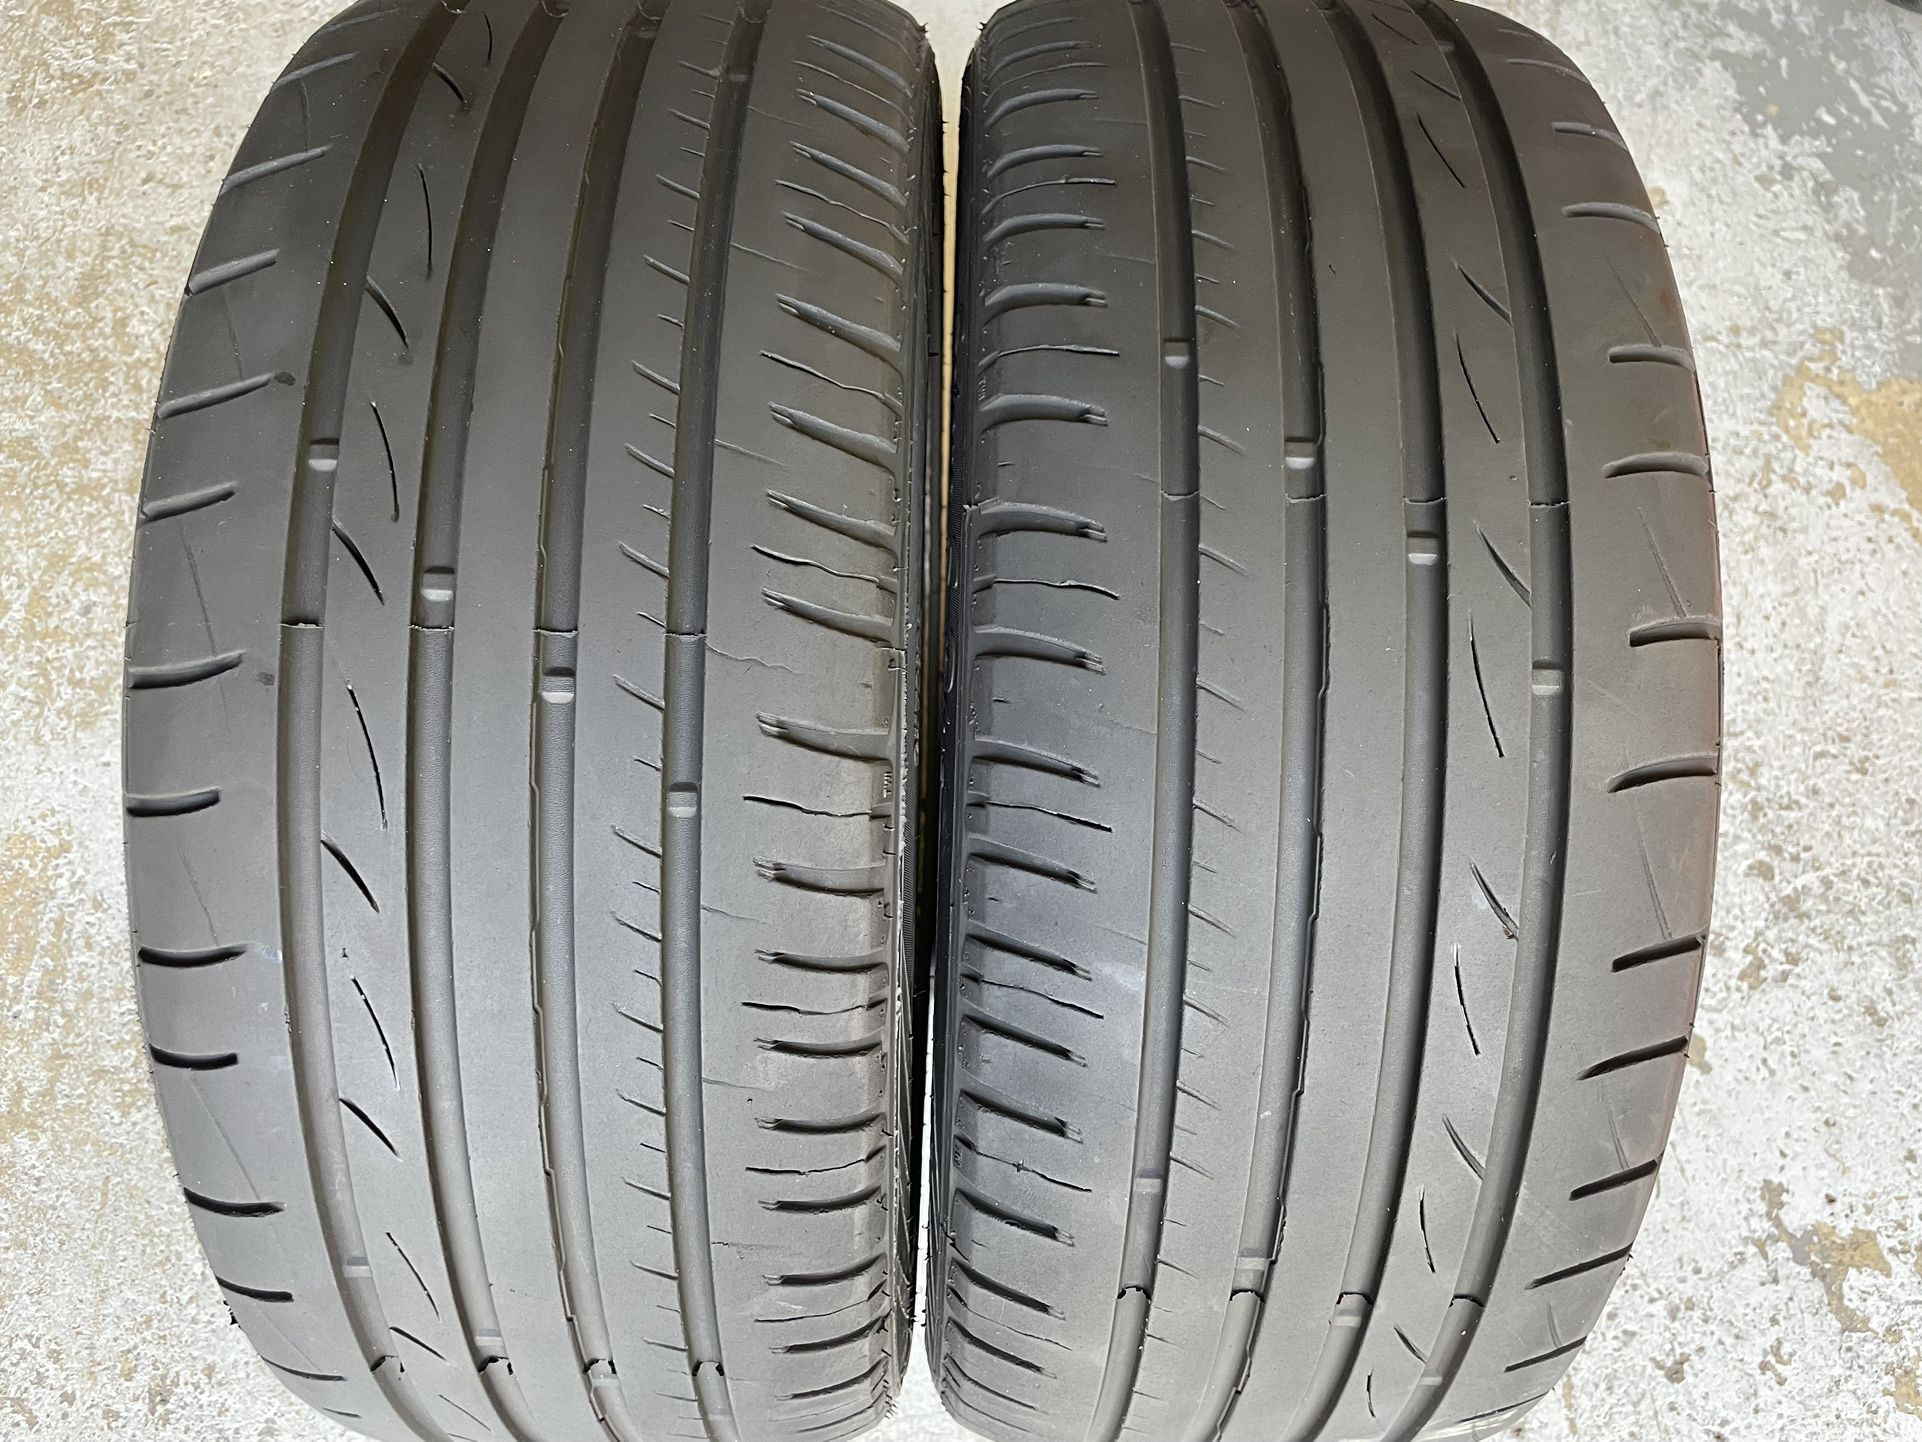 Two Tires 225/45/17 Premiorai With 80% Left Cheap Pair 